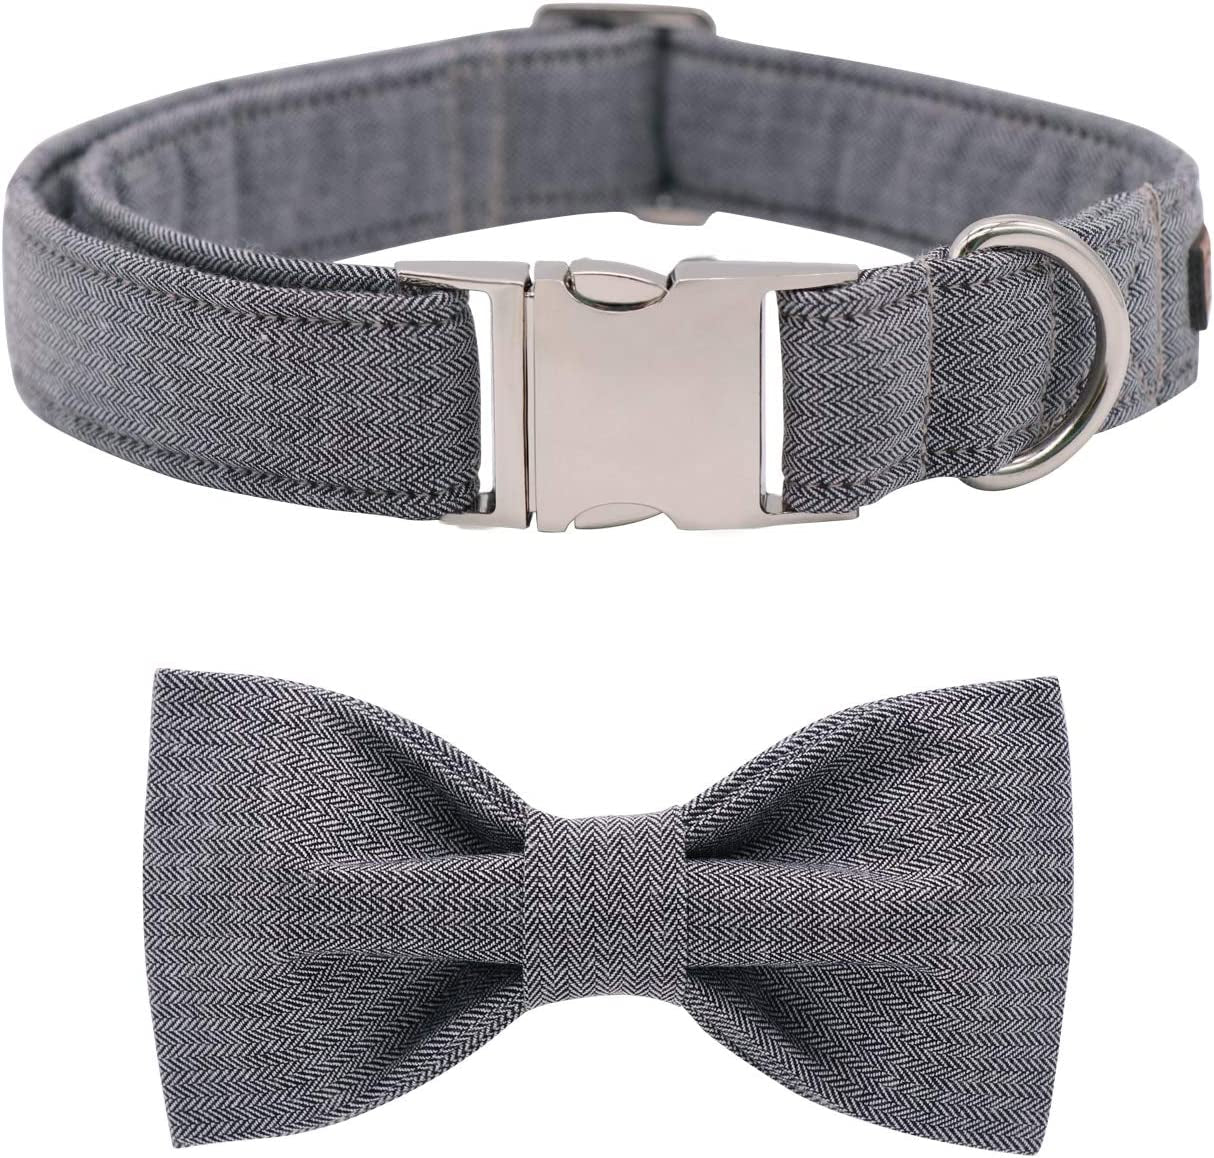 Professional Product Title: "Premium Bowtie Dog Collar - Adjustable, Durable, and Comfortable for Medium-Sized Dogs (Neck Size: 13.5-22 Inches)"